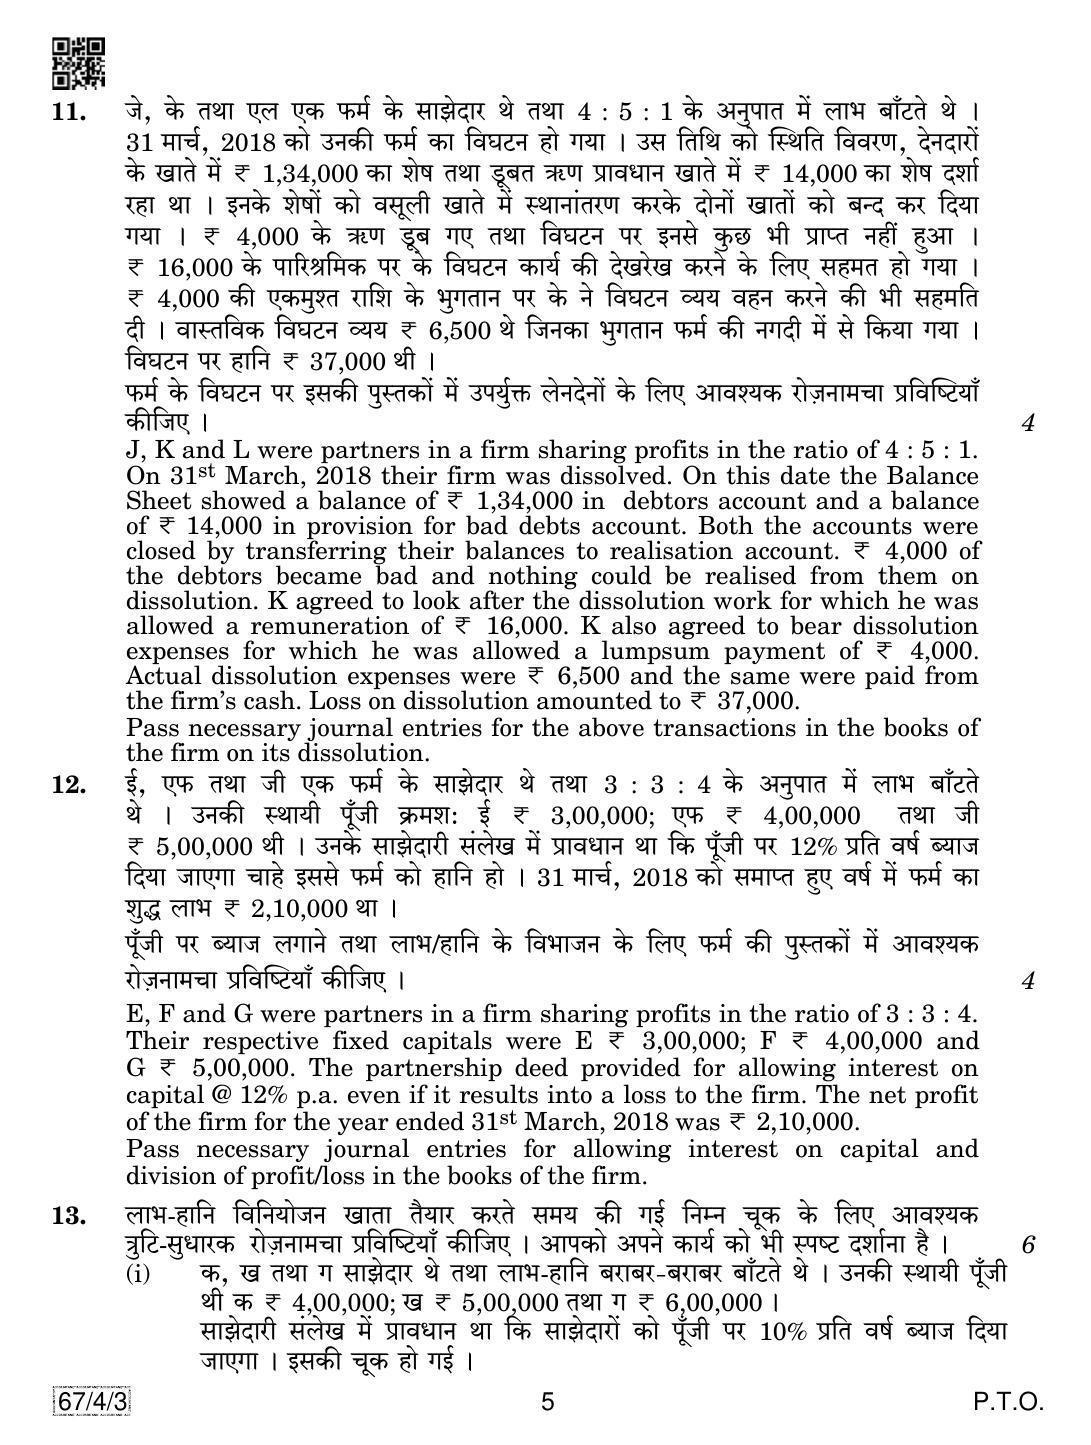 CBSE Class 12 67-4-3 Accountancy 2019 Question Paper - Page 5